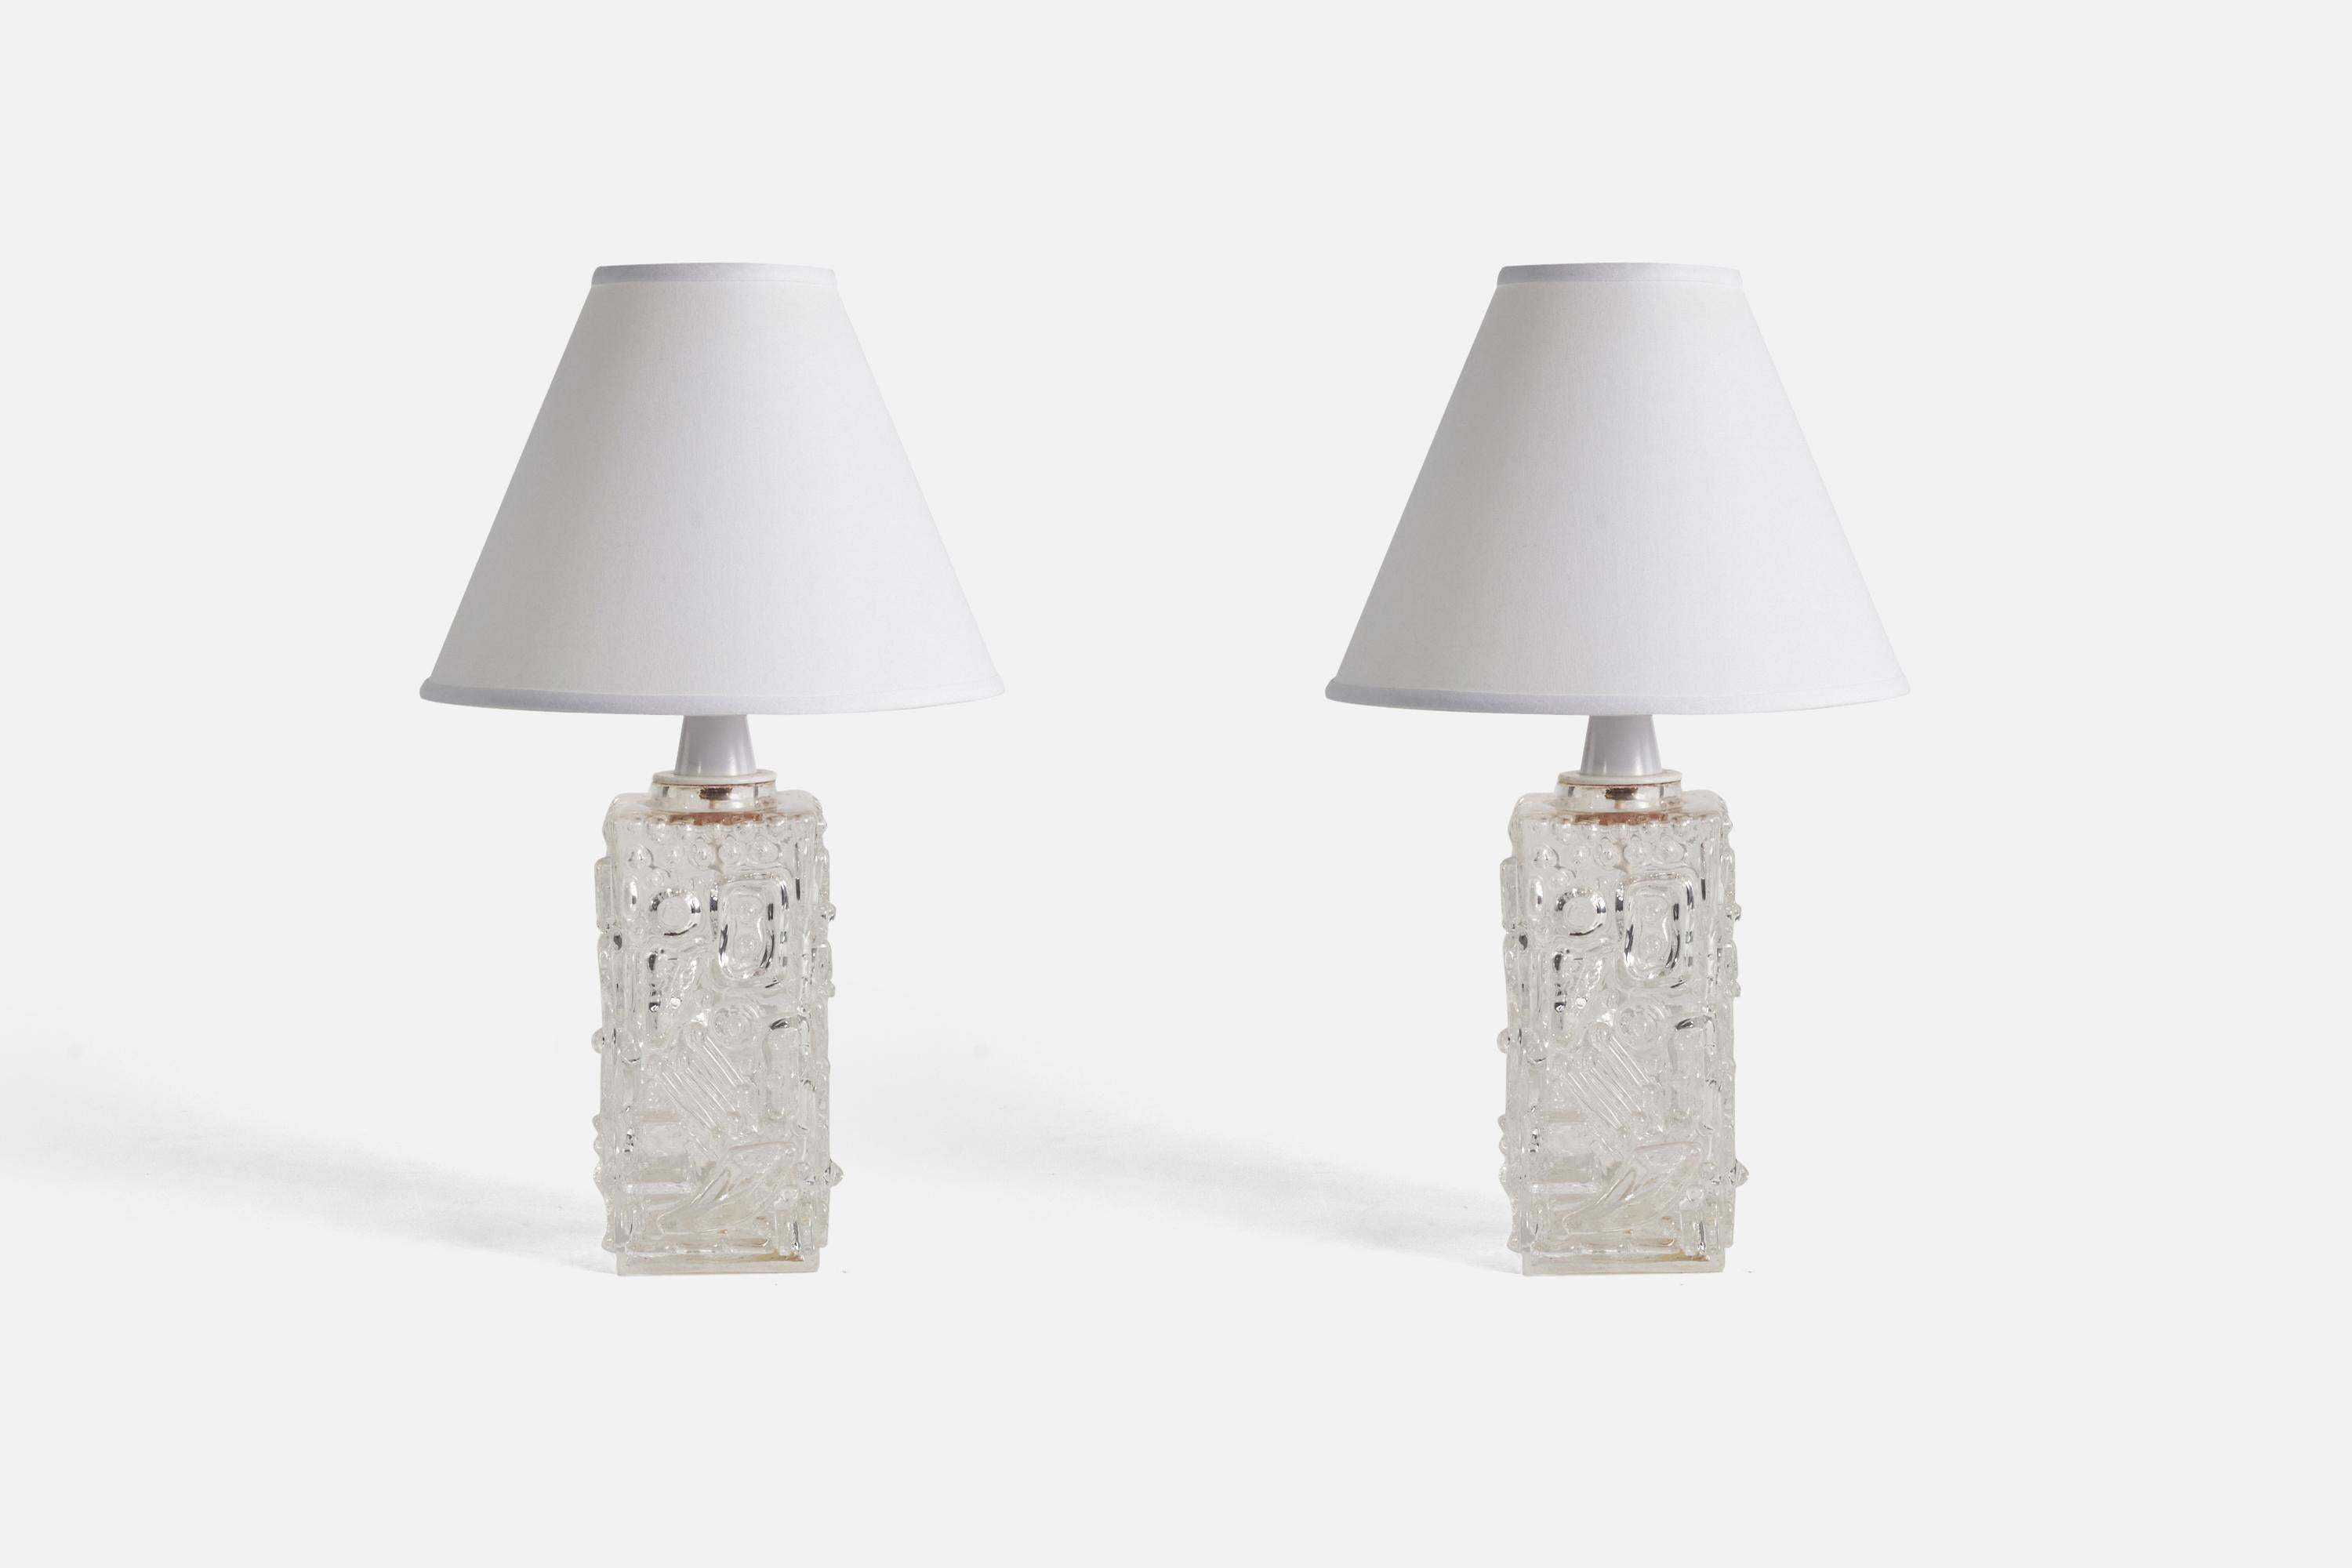 A pair of glass table lamps designed and produced by AB Stilarmatur, Tranås, Sweden, 1960s. 

Sold without Lampshade(s).
Dimensions of Lamp (inches) : 12.75 x 4.6 x 4.37 (Height x Width x Depth)
Dimensions of Shade (inches) : 4 x 10 x 8 (Top